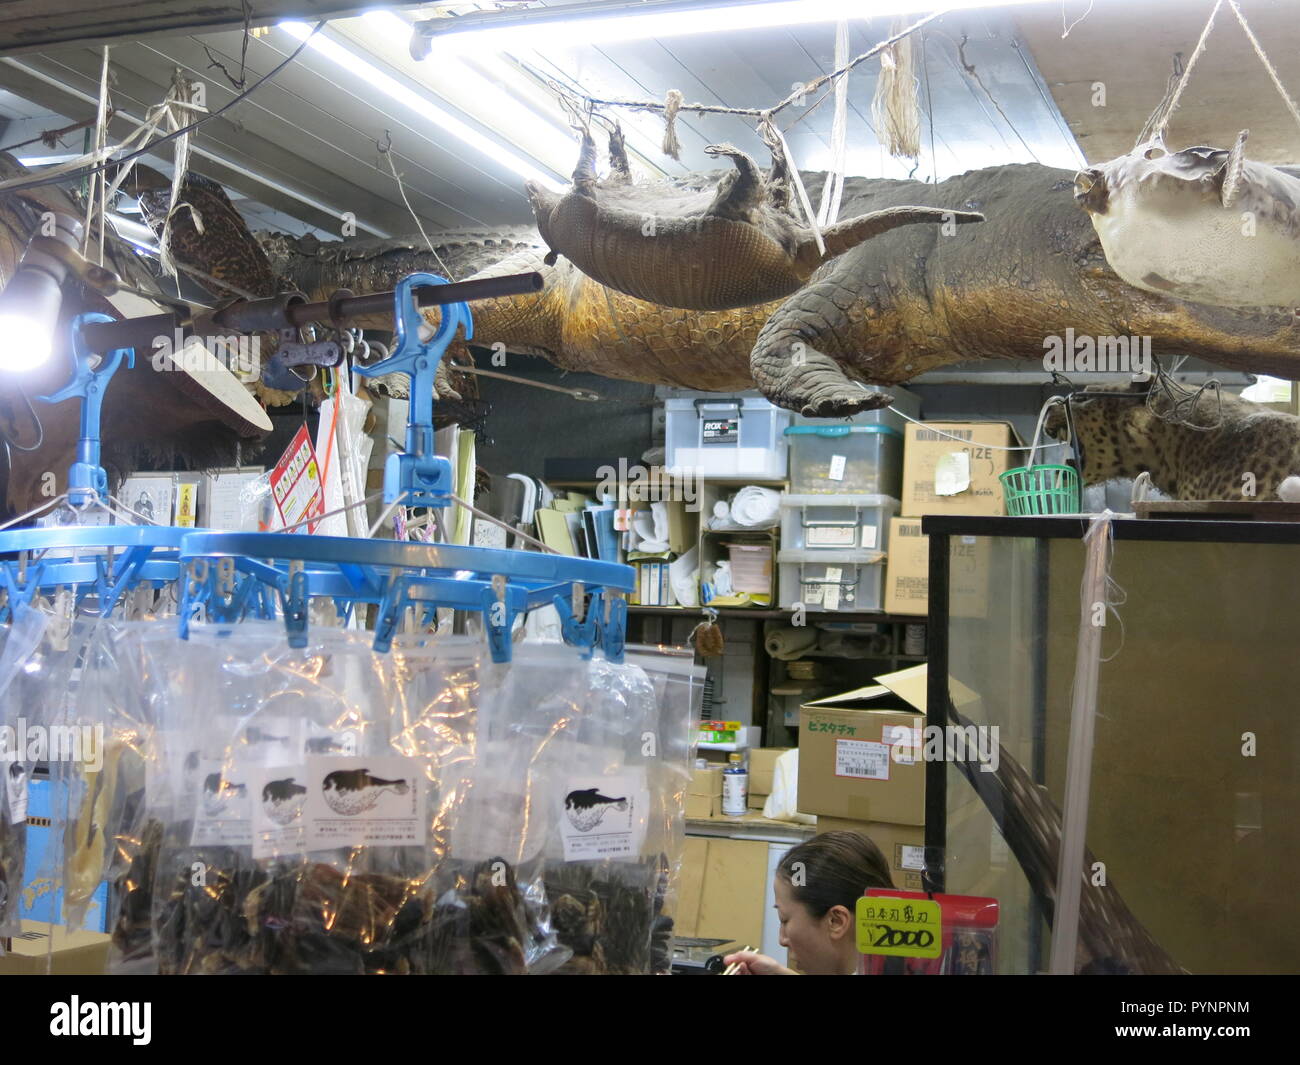 Strange creatures are hung from the ceiling in this Japanese store selling packets of local delicacies; Tokyo street market Stock Photo